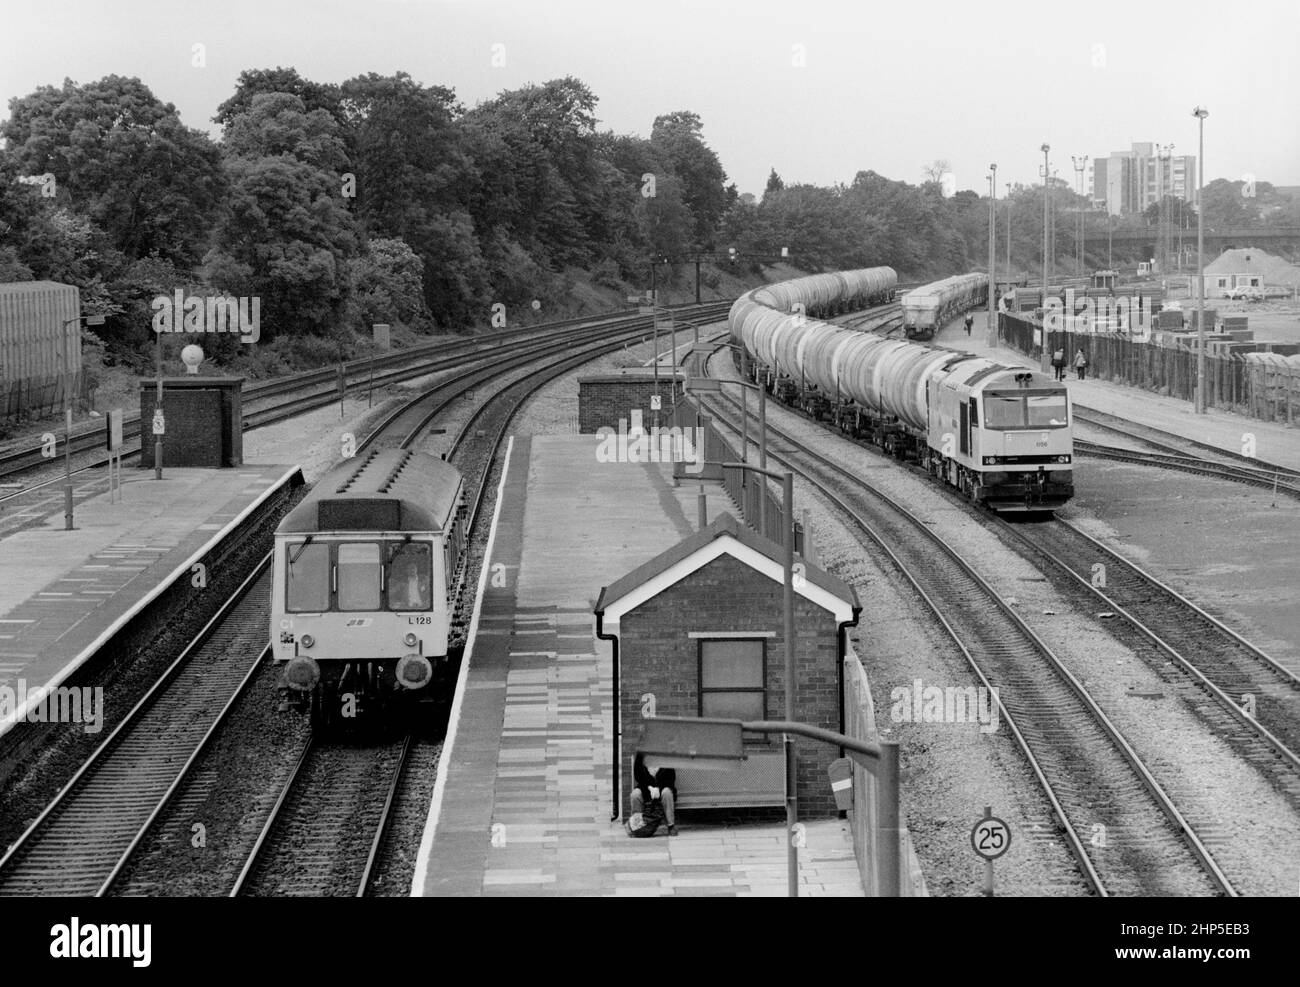 A Class 121 diesel multiple unit number L128 forming a Network SouthEast service pauses at Acton Main Line while class 60 diesel locomotive number 60056 working a train of bogie oil tanks awaits a path north in Acton yard. 10th June 1991. Stock Photo